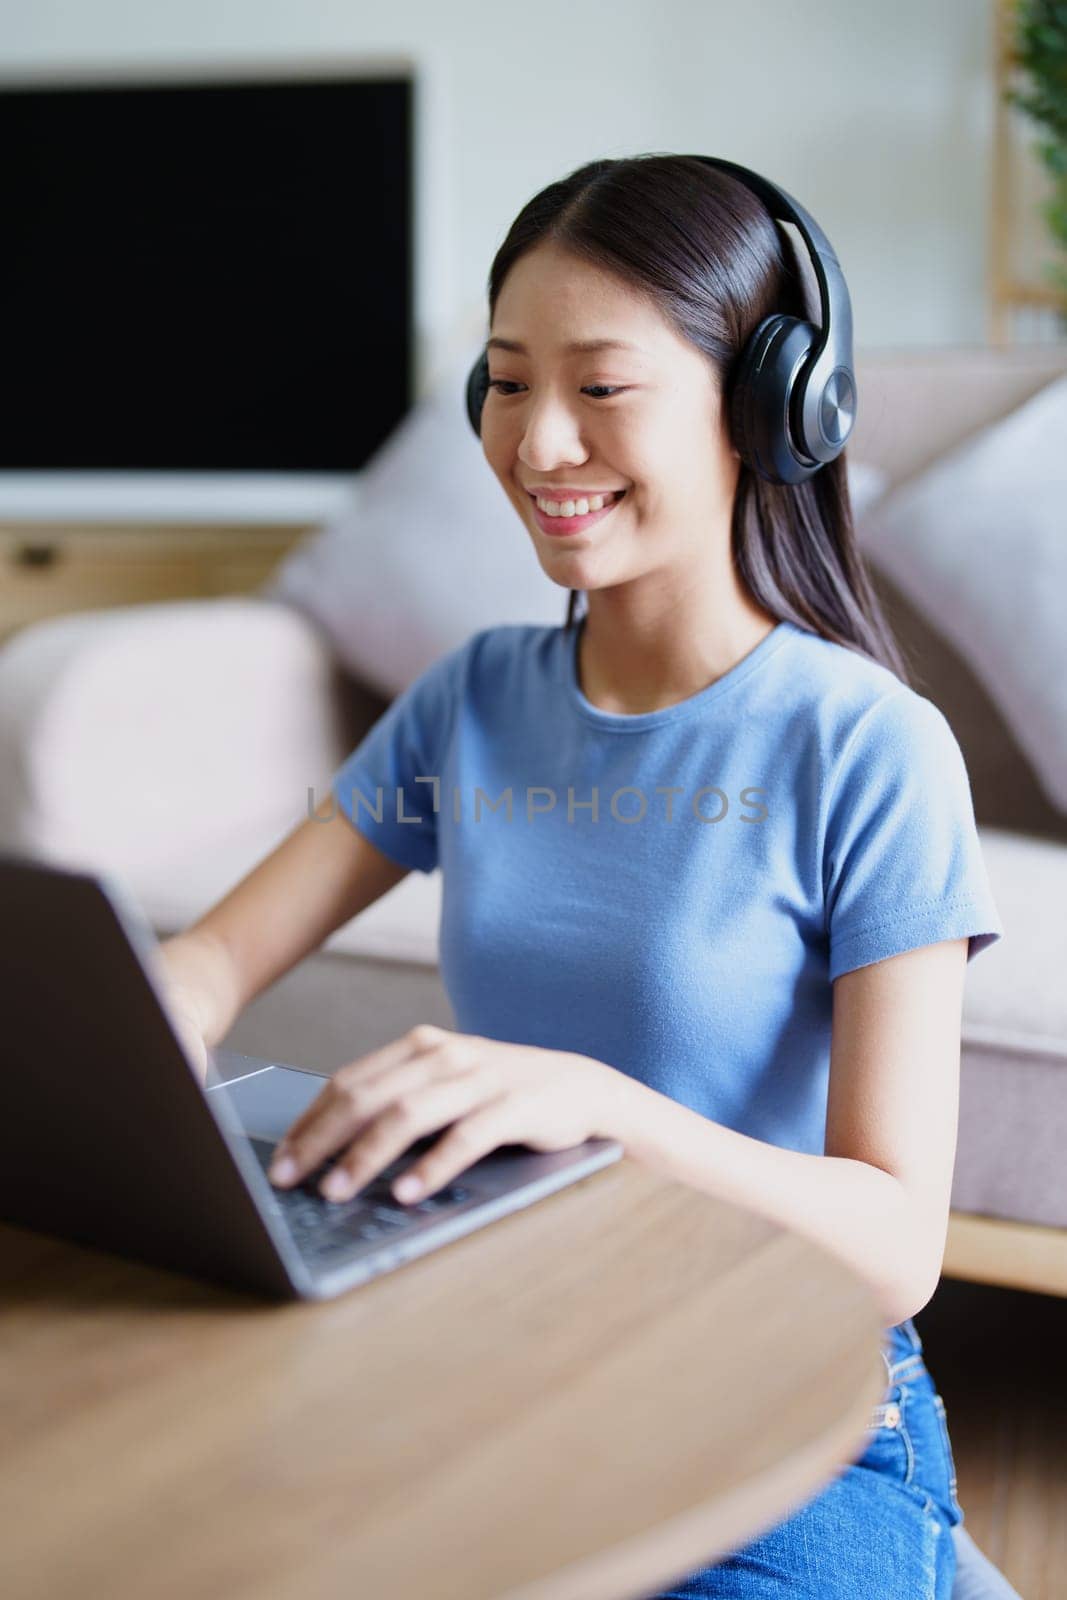 woman wearing headphones on comfortable couch listening to using computer laptop and music. by Manastrong